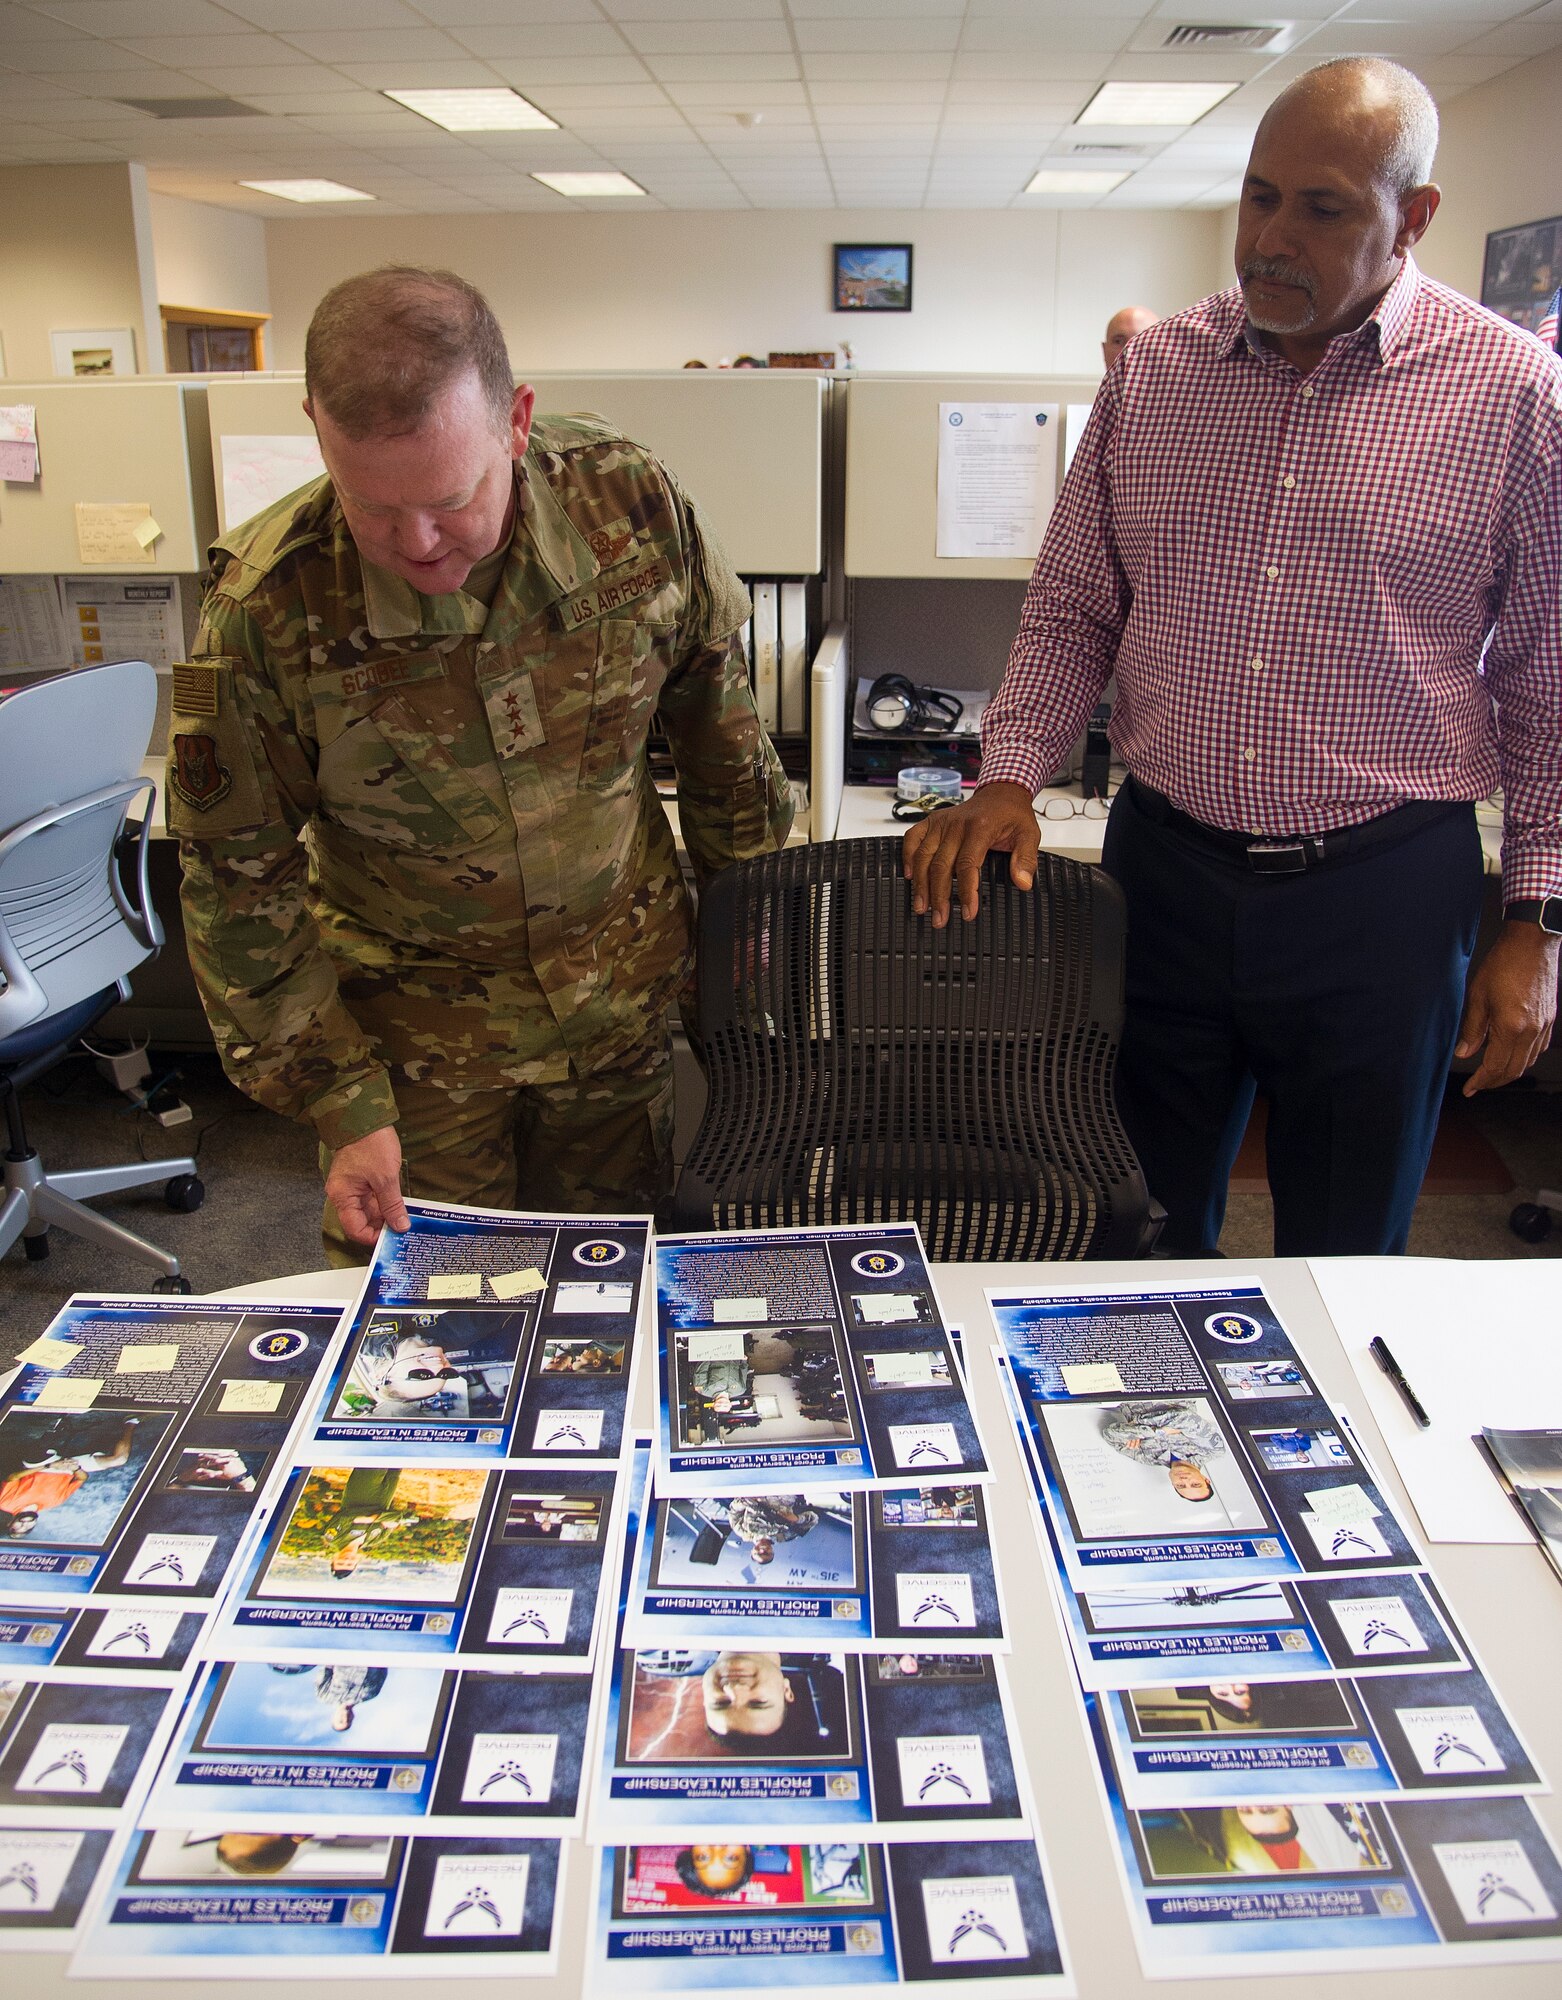 Lt. Gen. Richard W. Scobee, Commander, Air Force Reserve Command, looks over the Profiles in Leadership printouts with Phil Rhodes, a public affairs specialist, during a tour of the AFRC PA facilities, Robins Air Force Base, Ga., November 8, 2018. (U.S. Air Force photo by Master Sgt. Stephen D. Schester)